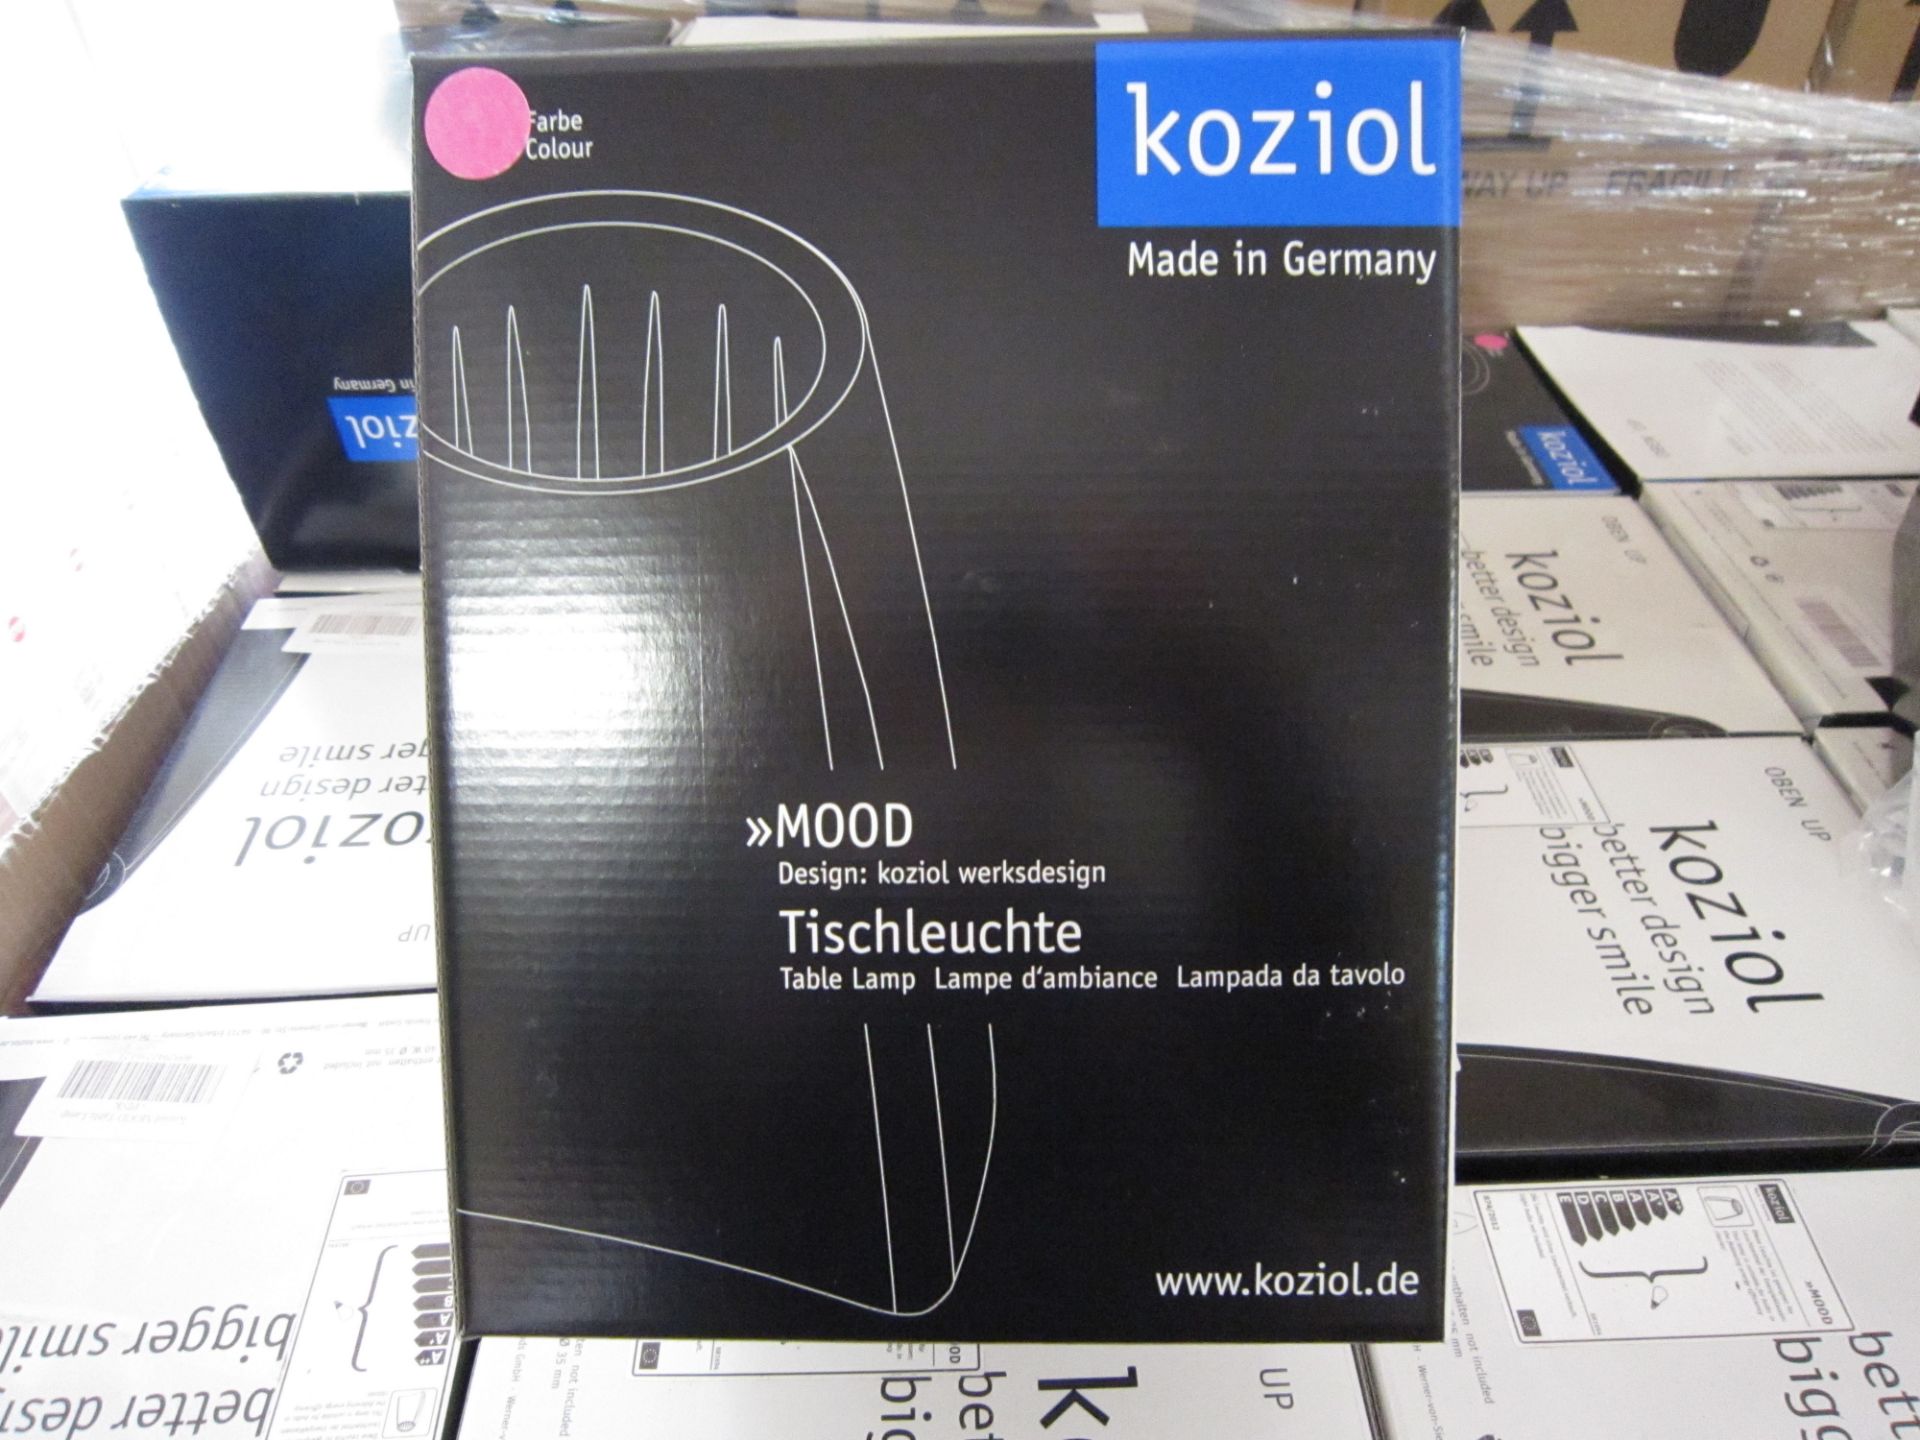 80pcs - Brand new light pink kozoi - German manufactured pendant light with fittings - brand new and - Image 2 of 3